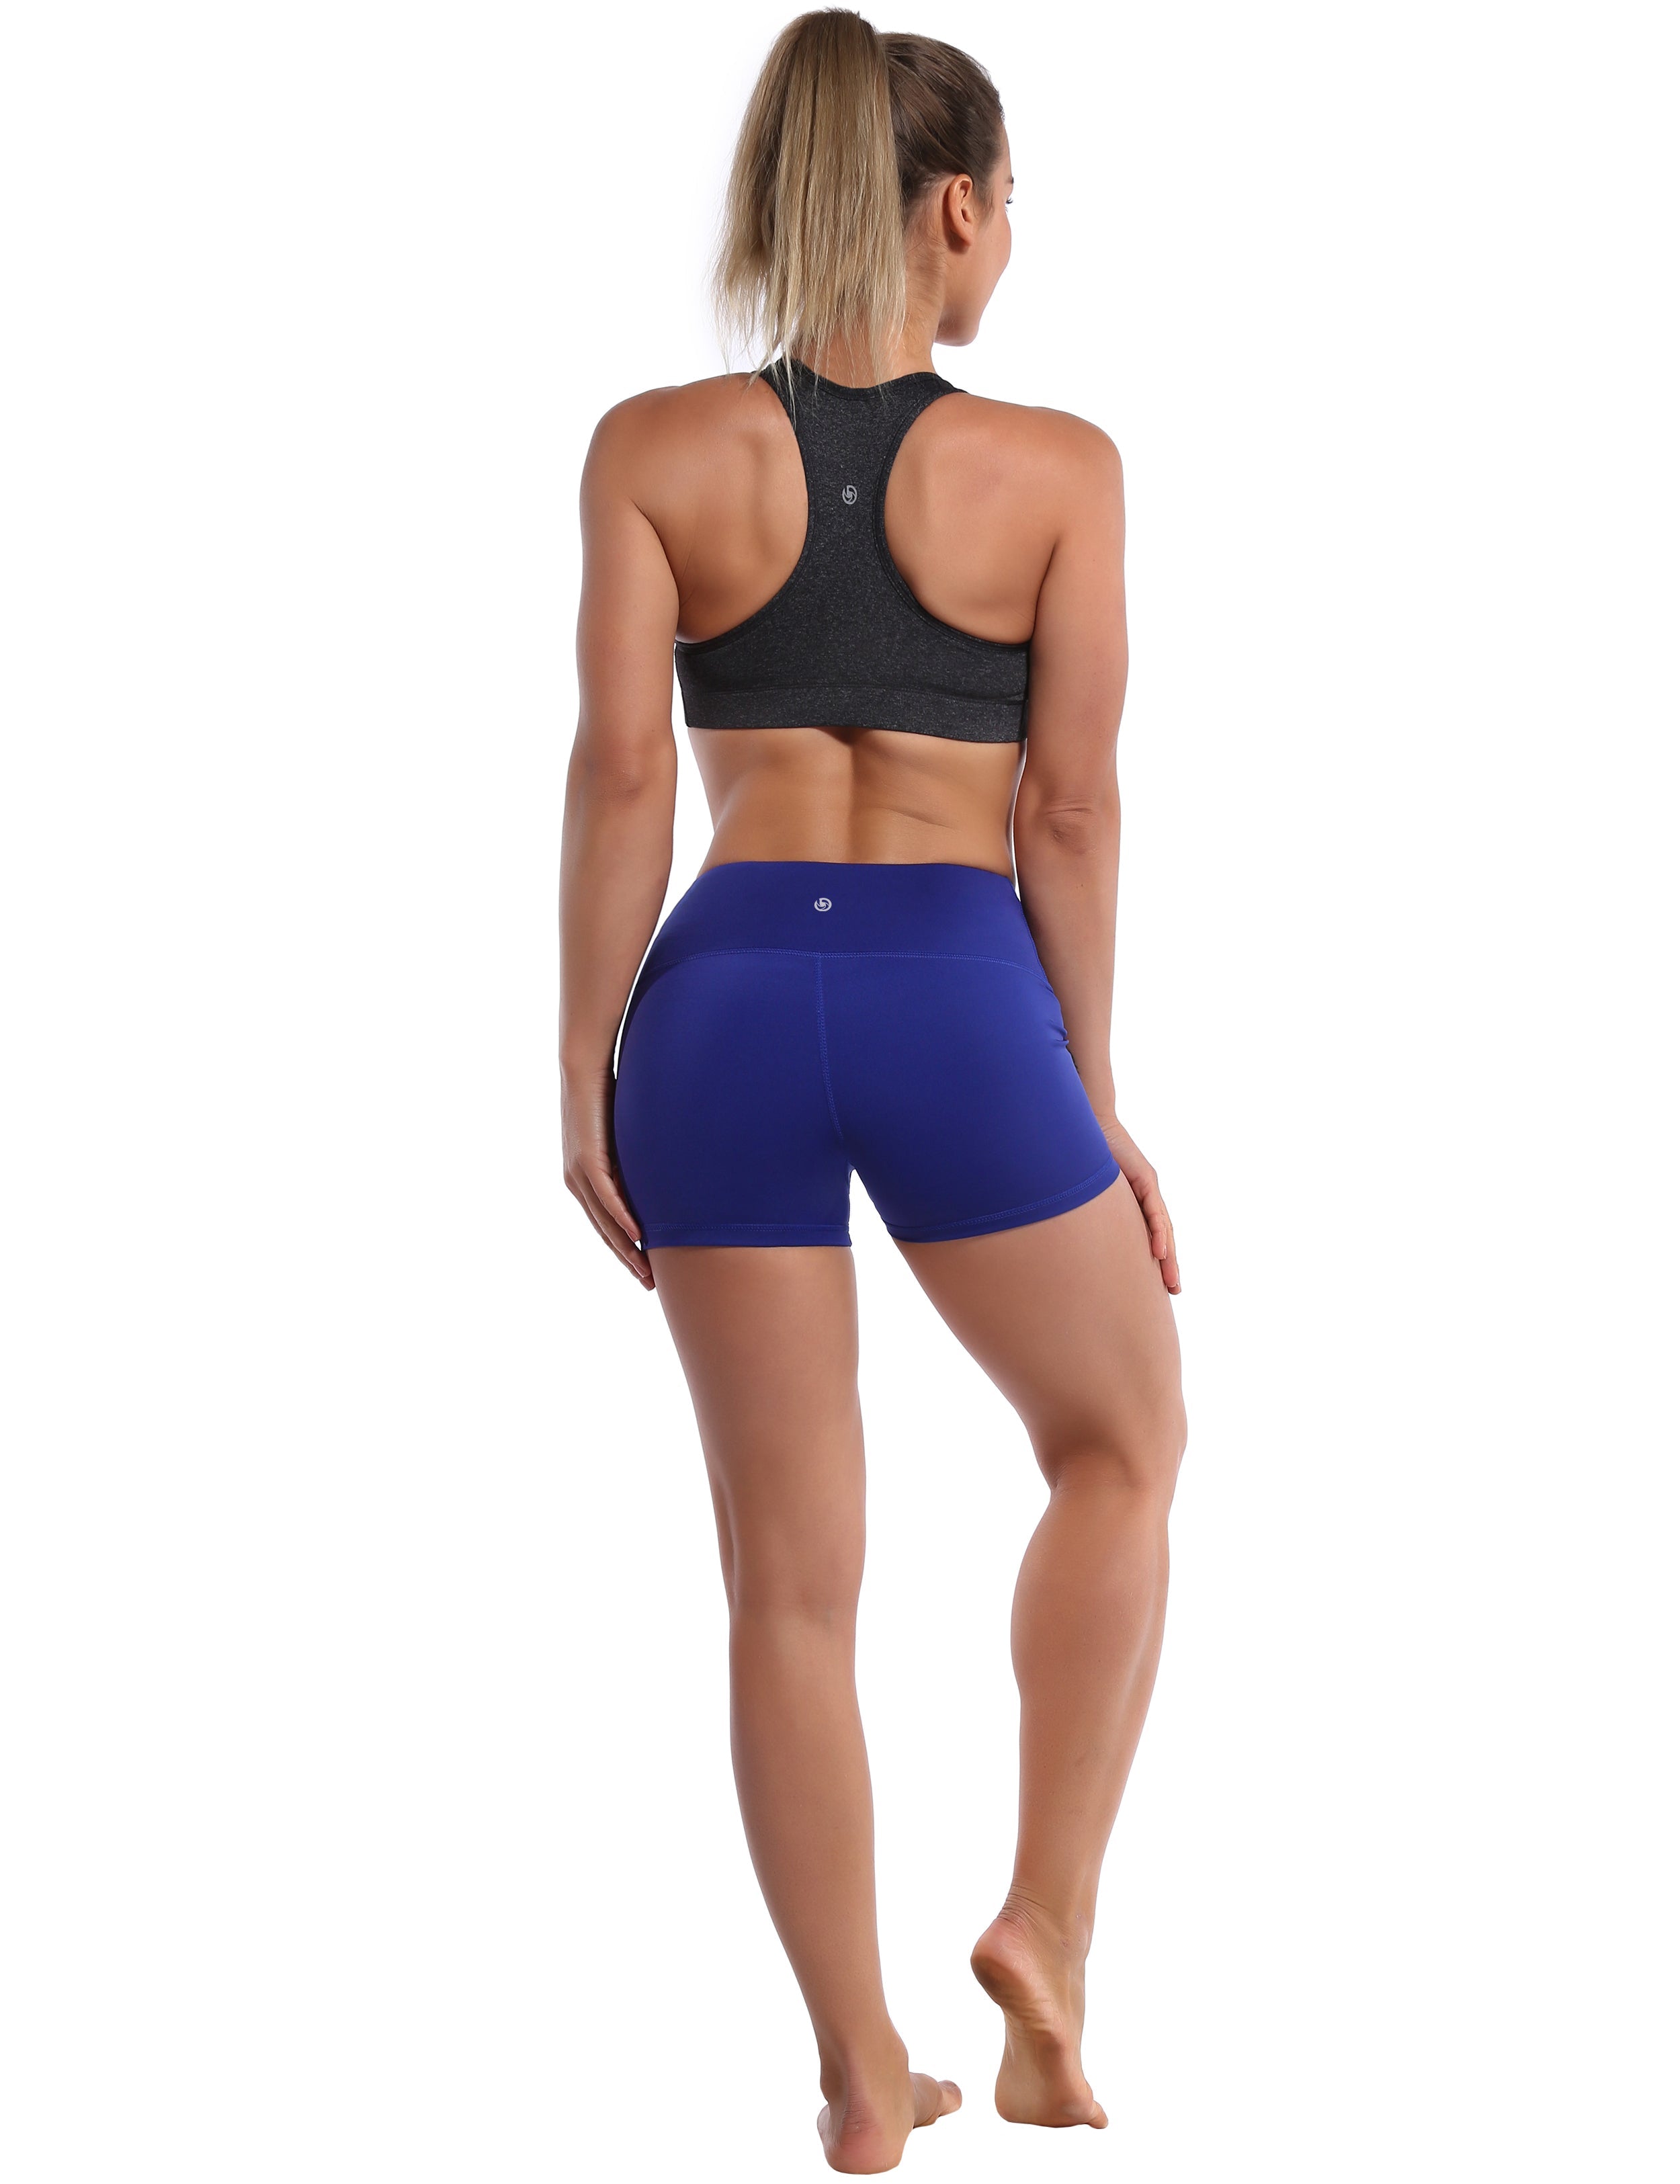 2.5" Running Shorts navy Softest-ever fabric High elasticity High density 4-way stretch Fabric doesn't attract lint easily No see-through Moisture-wicking Machine wash 75% Nylon, 25% Spandex